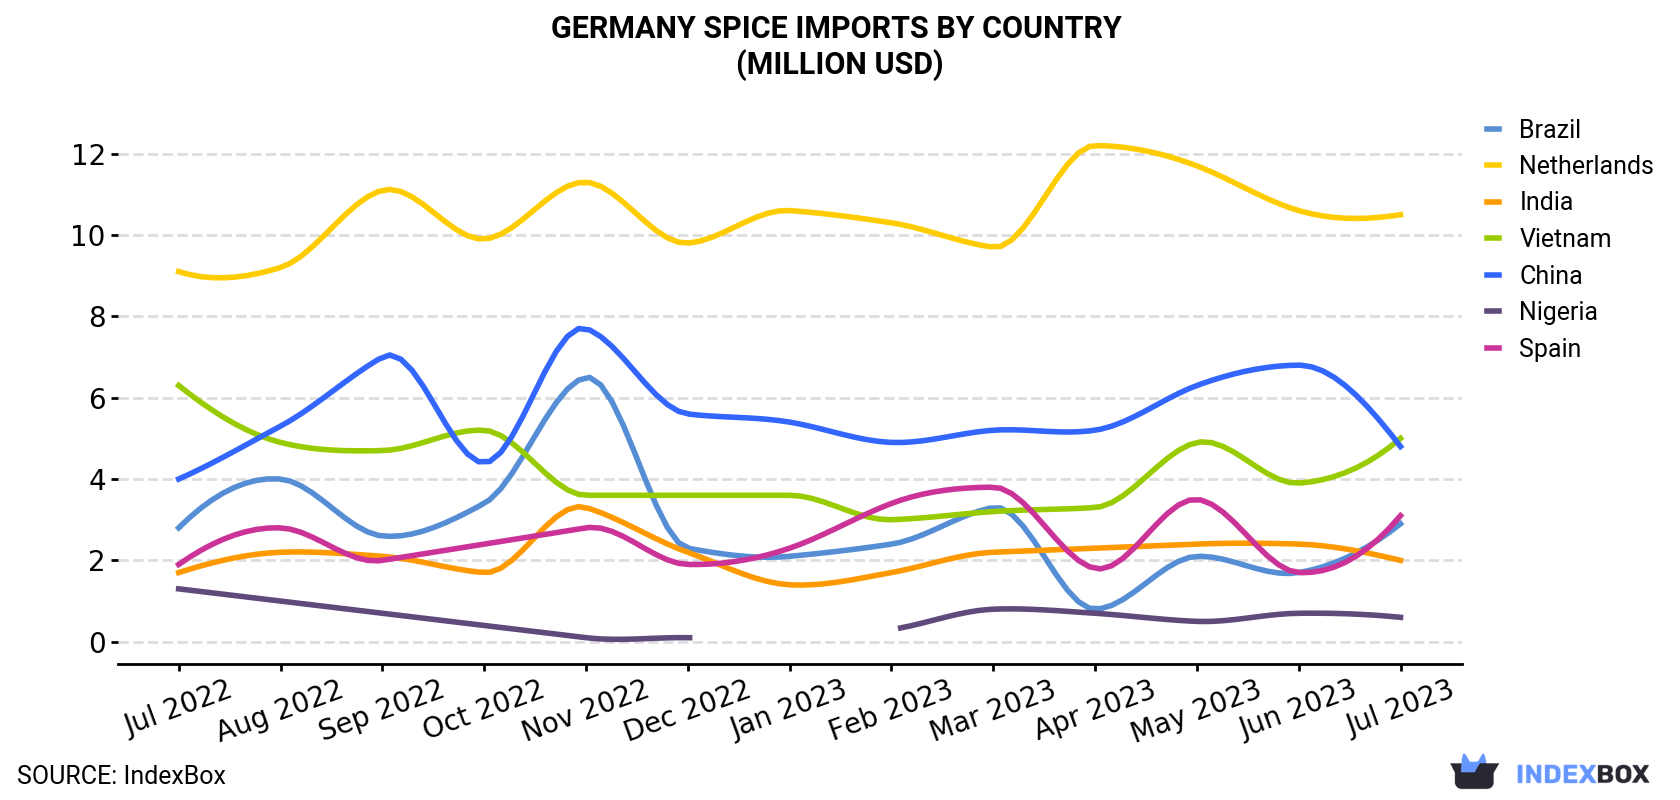 Germany Spice Imports By Country (Million USD)